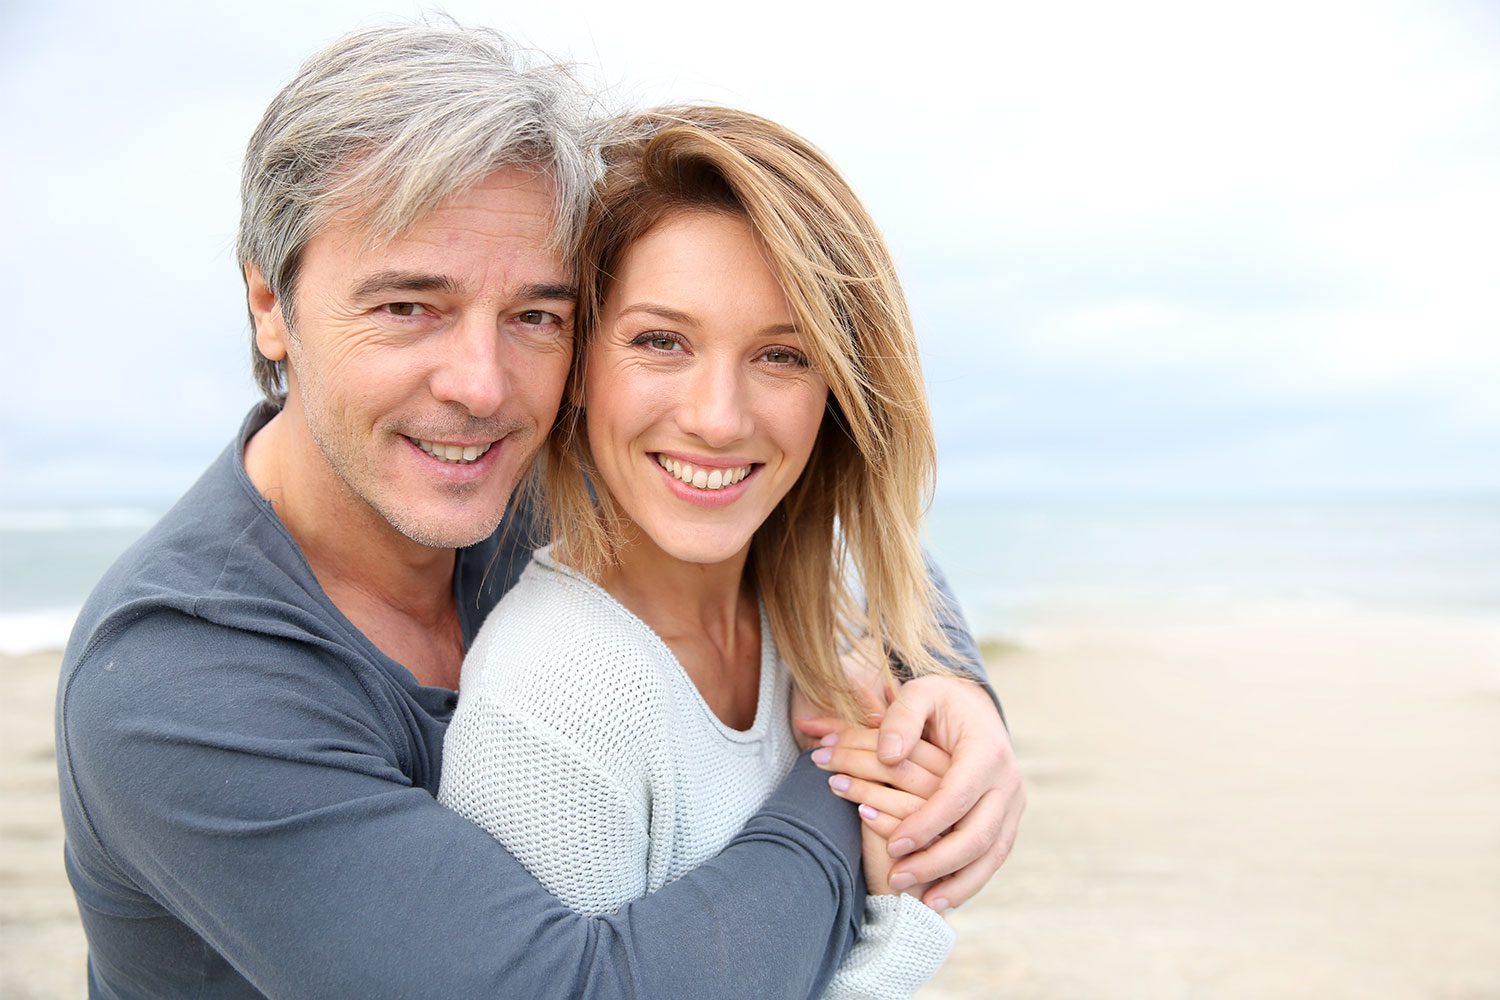 what is testosterone replacement therapy